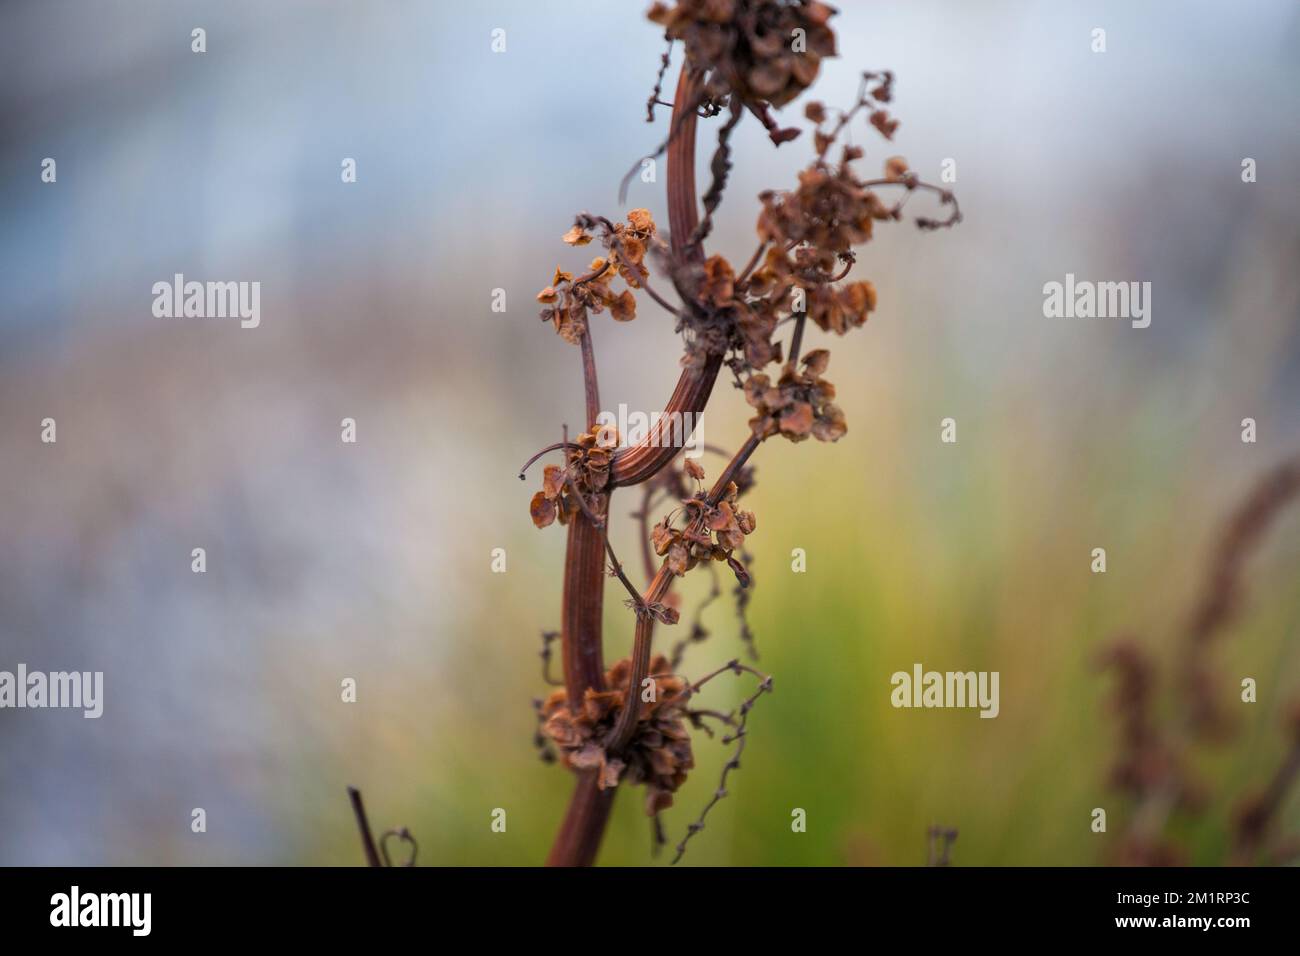 The close-up view of a dry Rumex conglomeratus plant before the blurred background Stock Photo